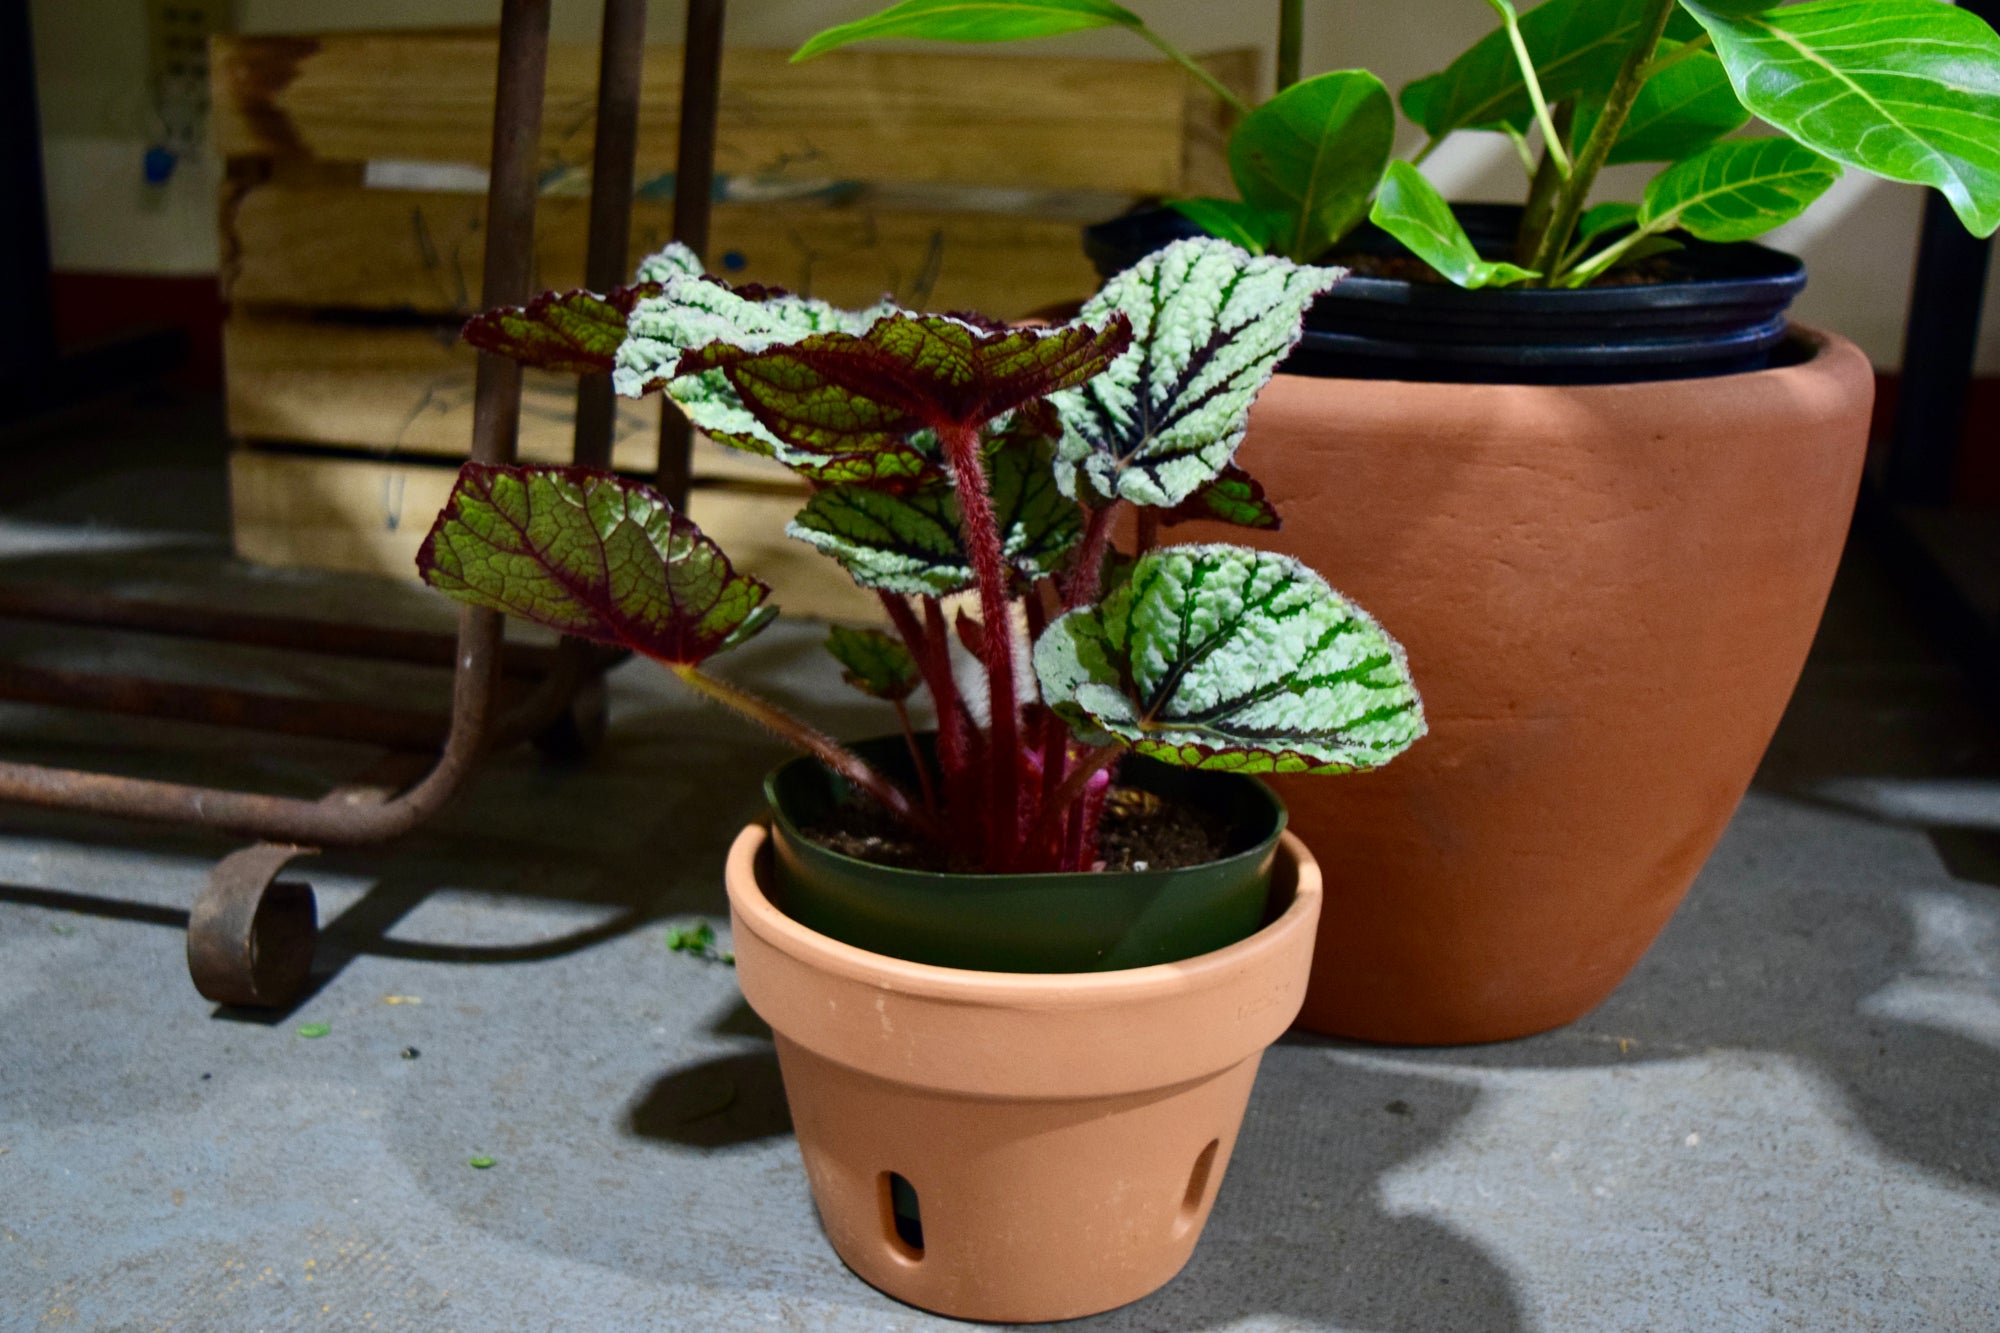 A terracotta orchid pot with a green and red plant inside. There is a larger terracotta pot with a plant in the background.